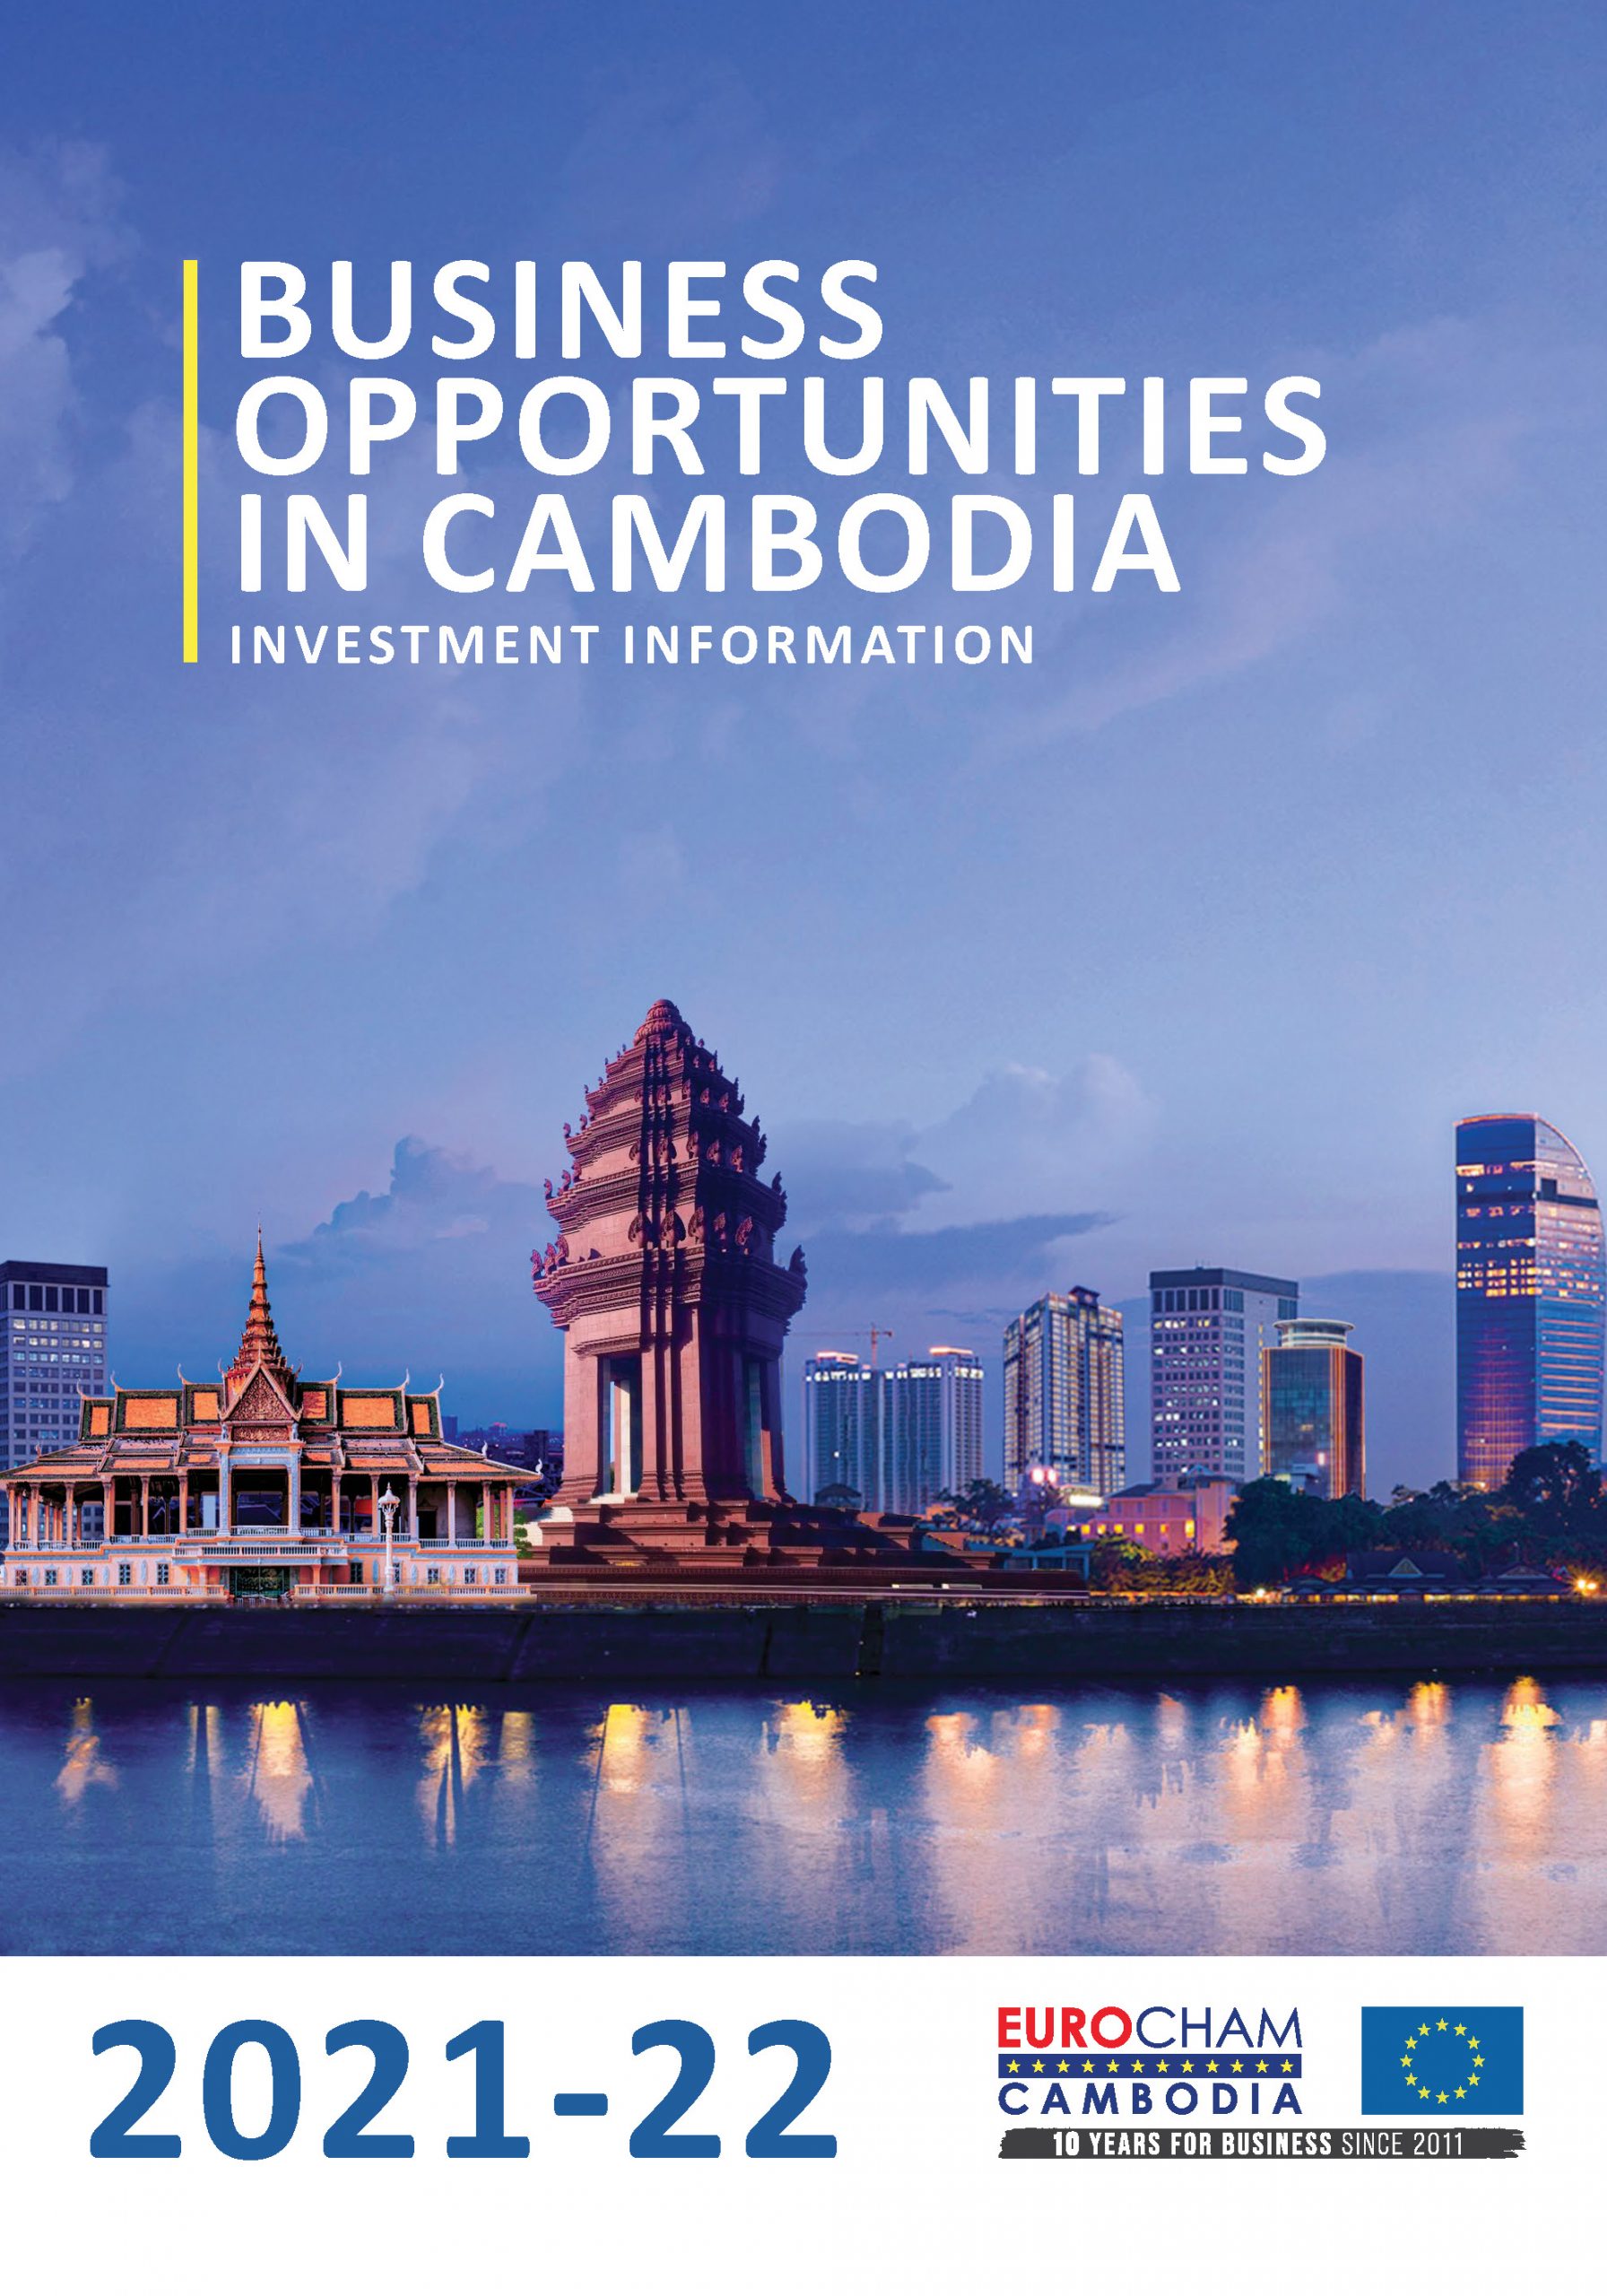 BUSINESS OPPORTUNITIES IN CAMBODIA 2021-2022